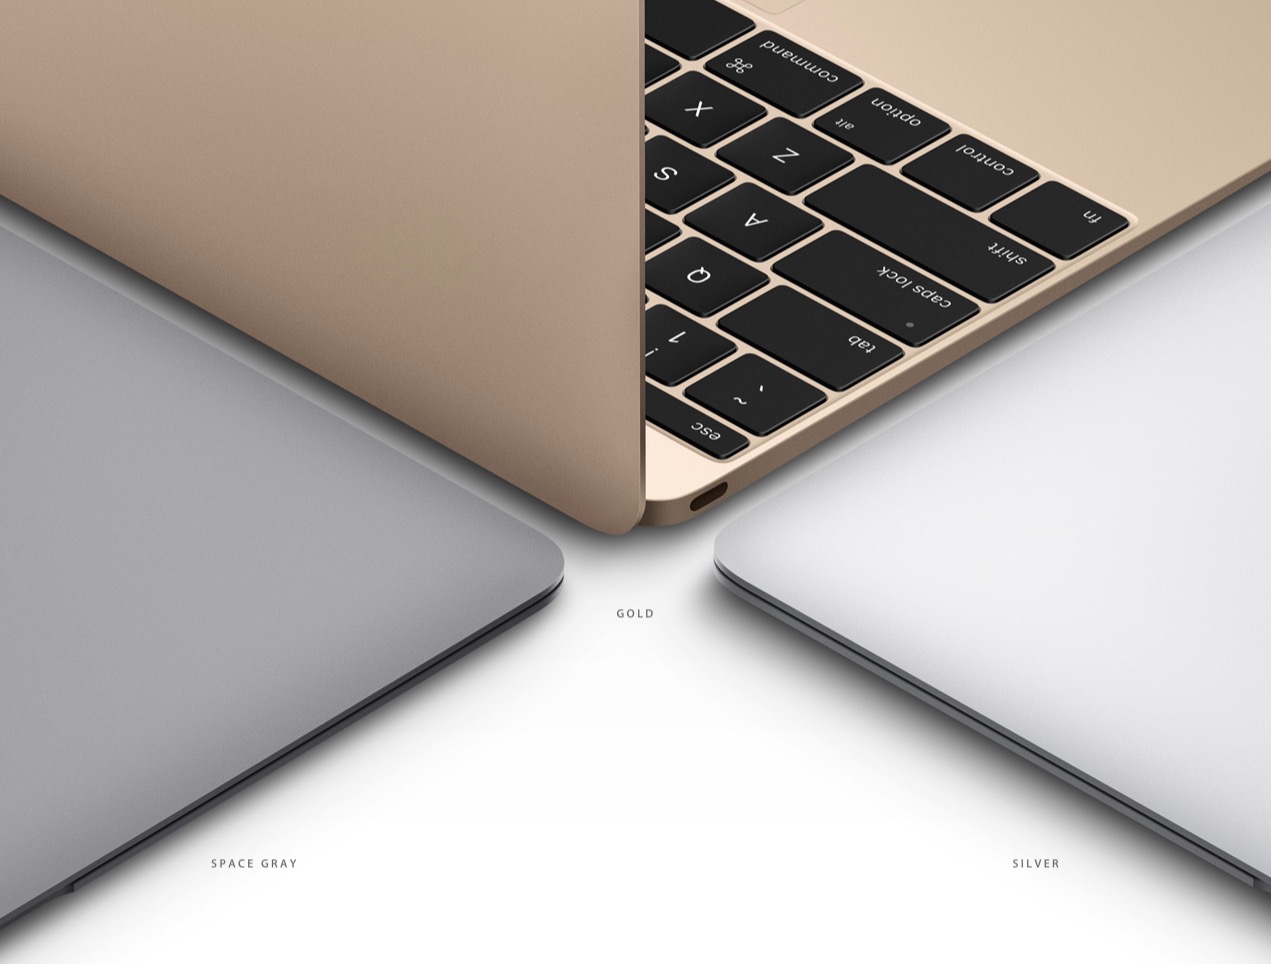 Pick from three Macbook color options.